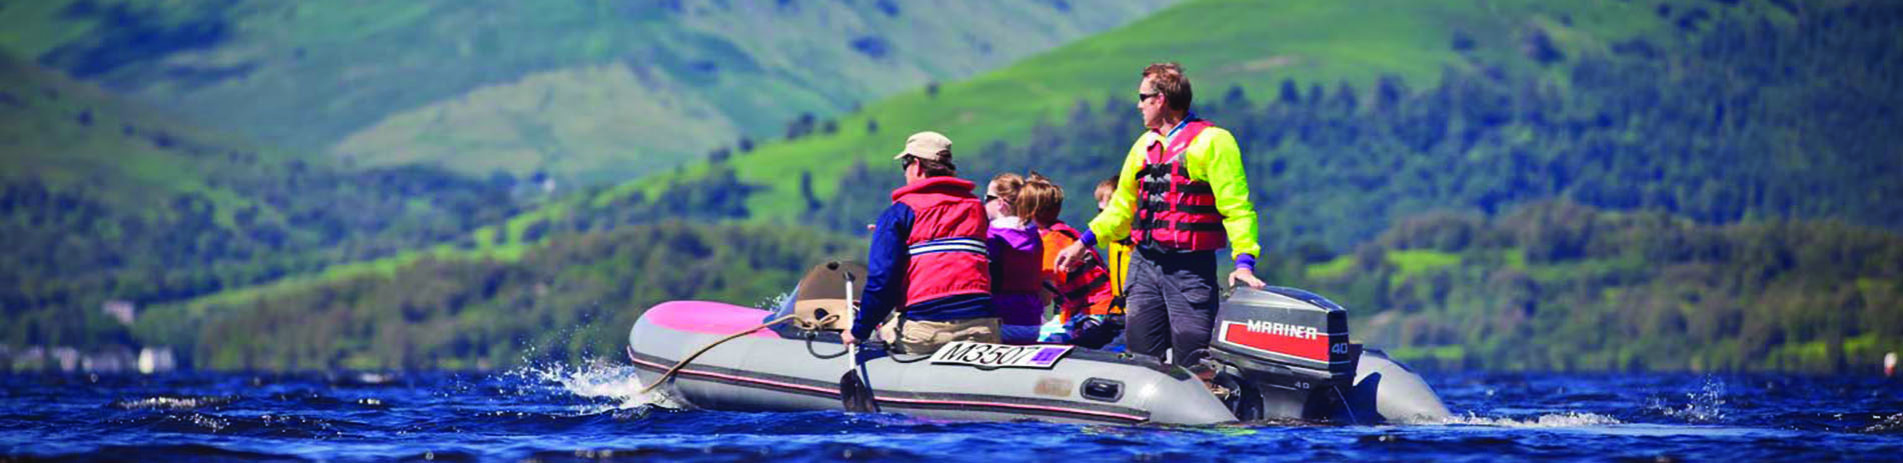 group-of-five-people-in-life-vests-on-motor-boat-on-loch-lomond-with-wooded-shores-in-the-distance